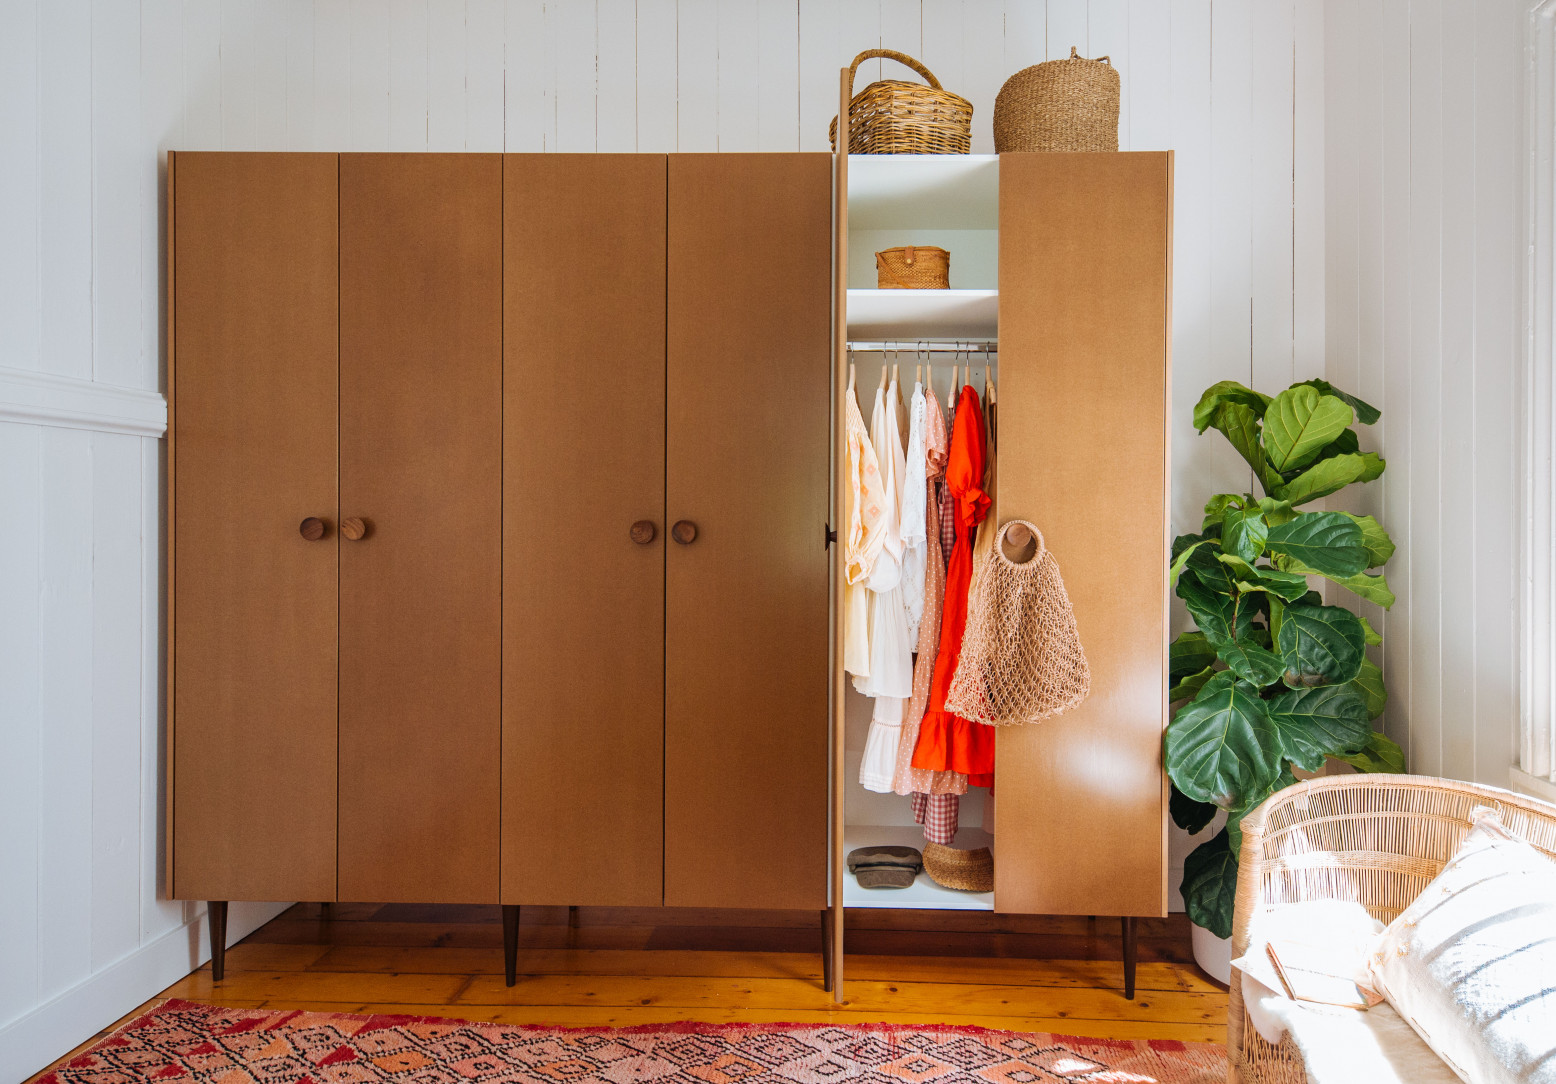 How To Build Your Own Wardrobes Out Of Kitchen Cabinets